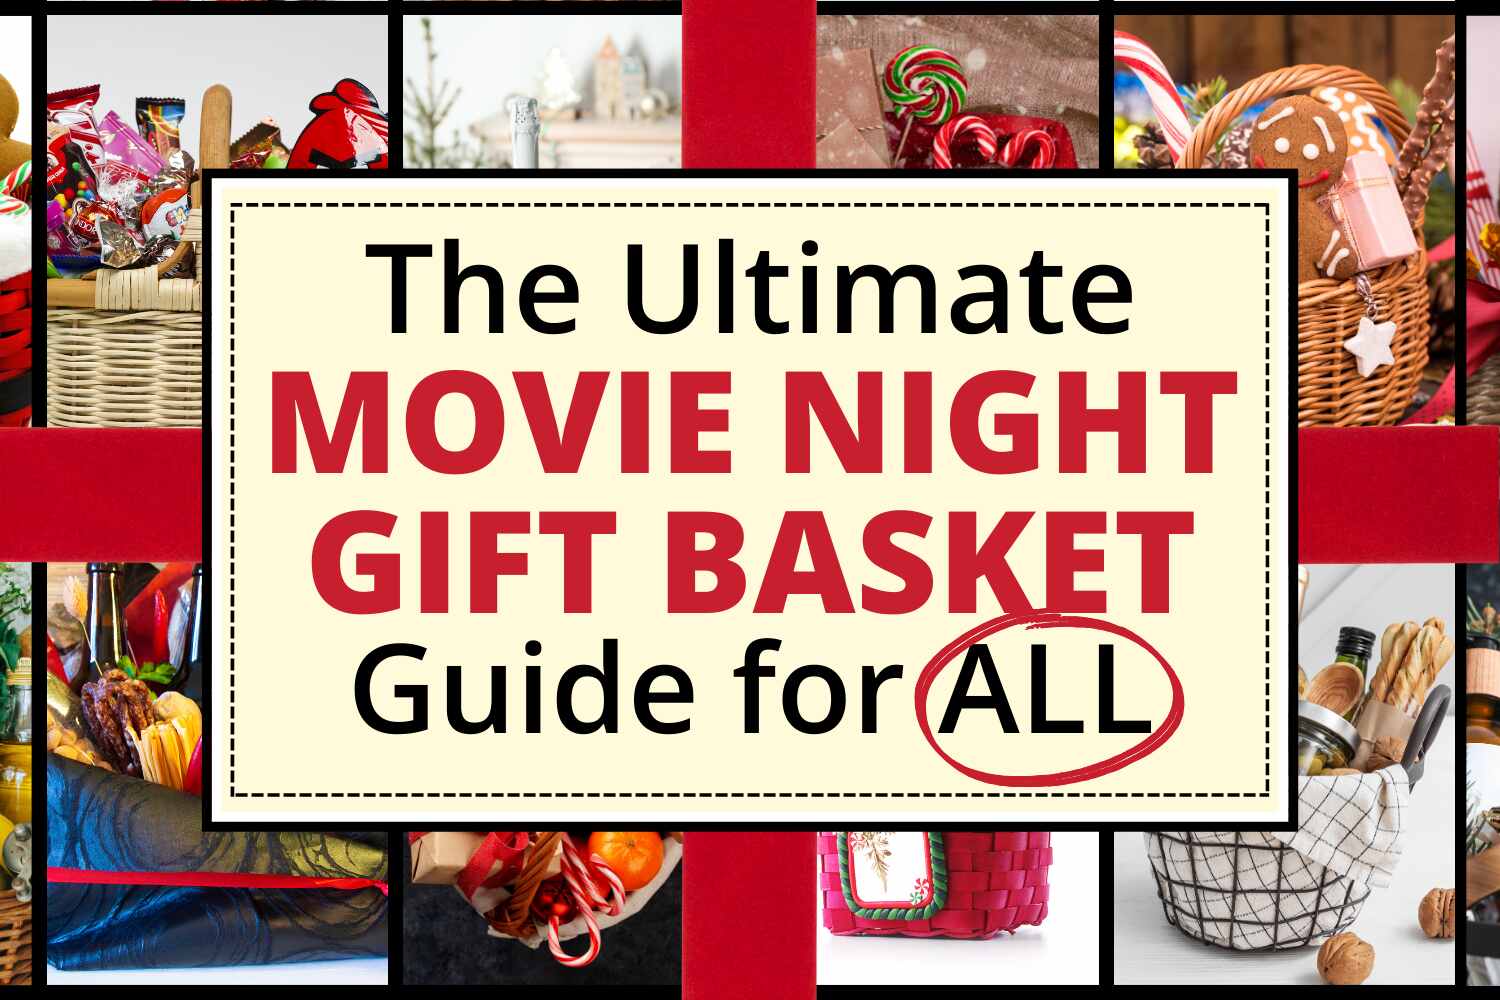 the ultimate movie night gift basket guide for all (updated)